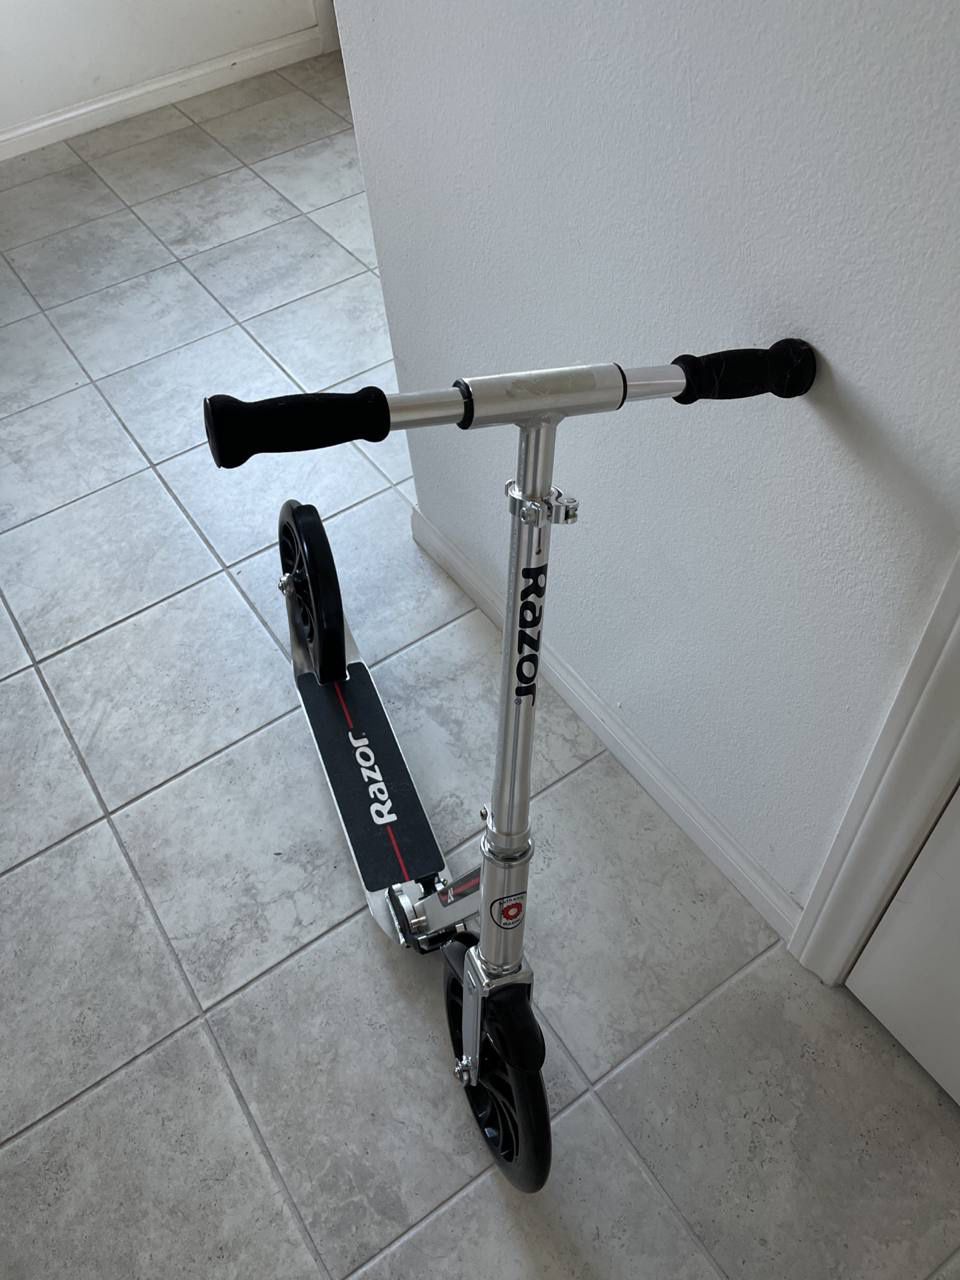 Authentic Razor A6 kickback Scooter (large wheels)